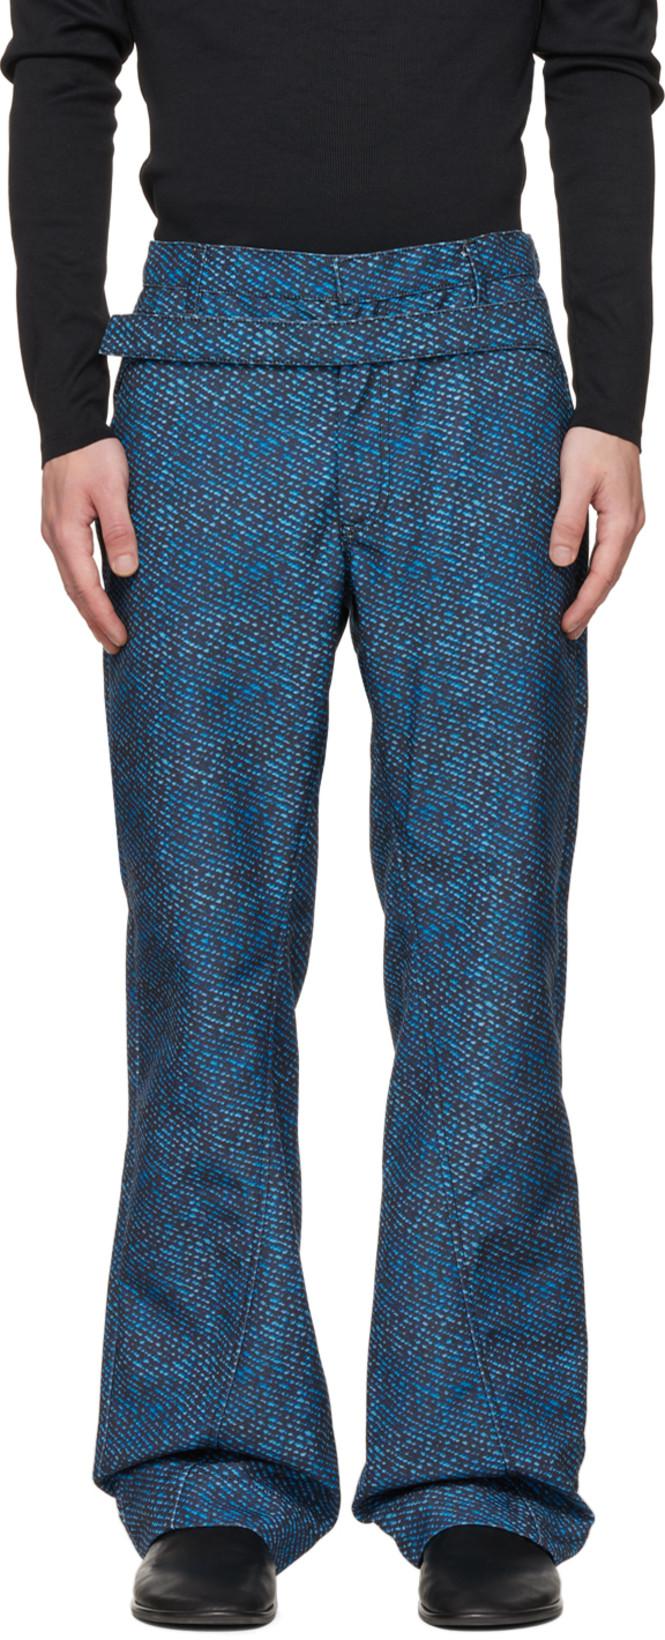 Black & Blue Benz Trousers by BIANCA SAUNDERS